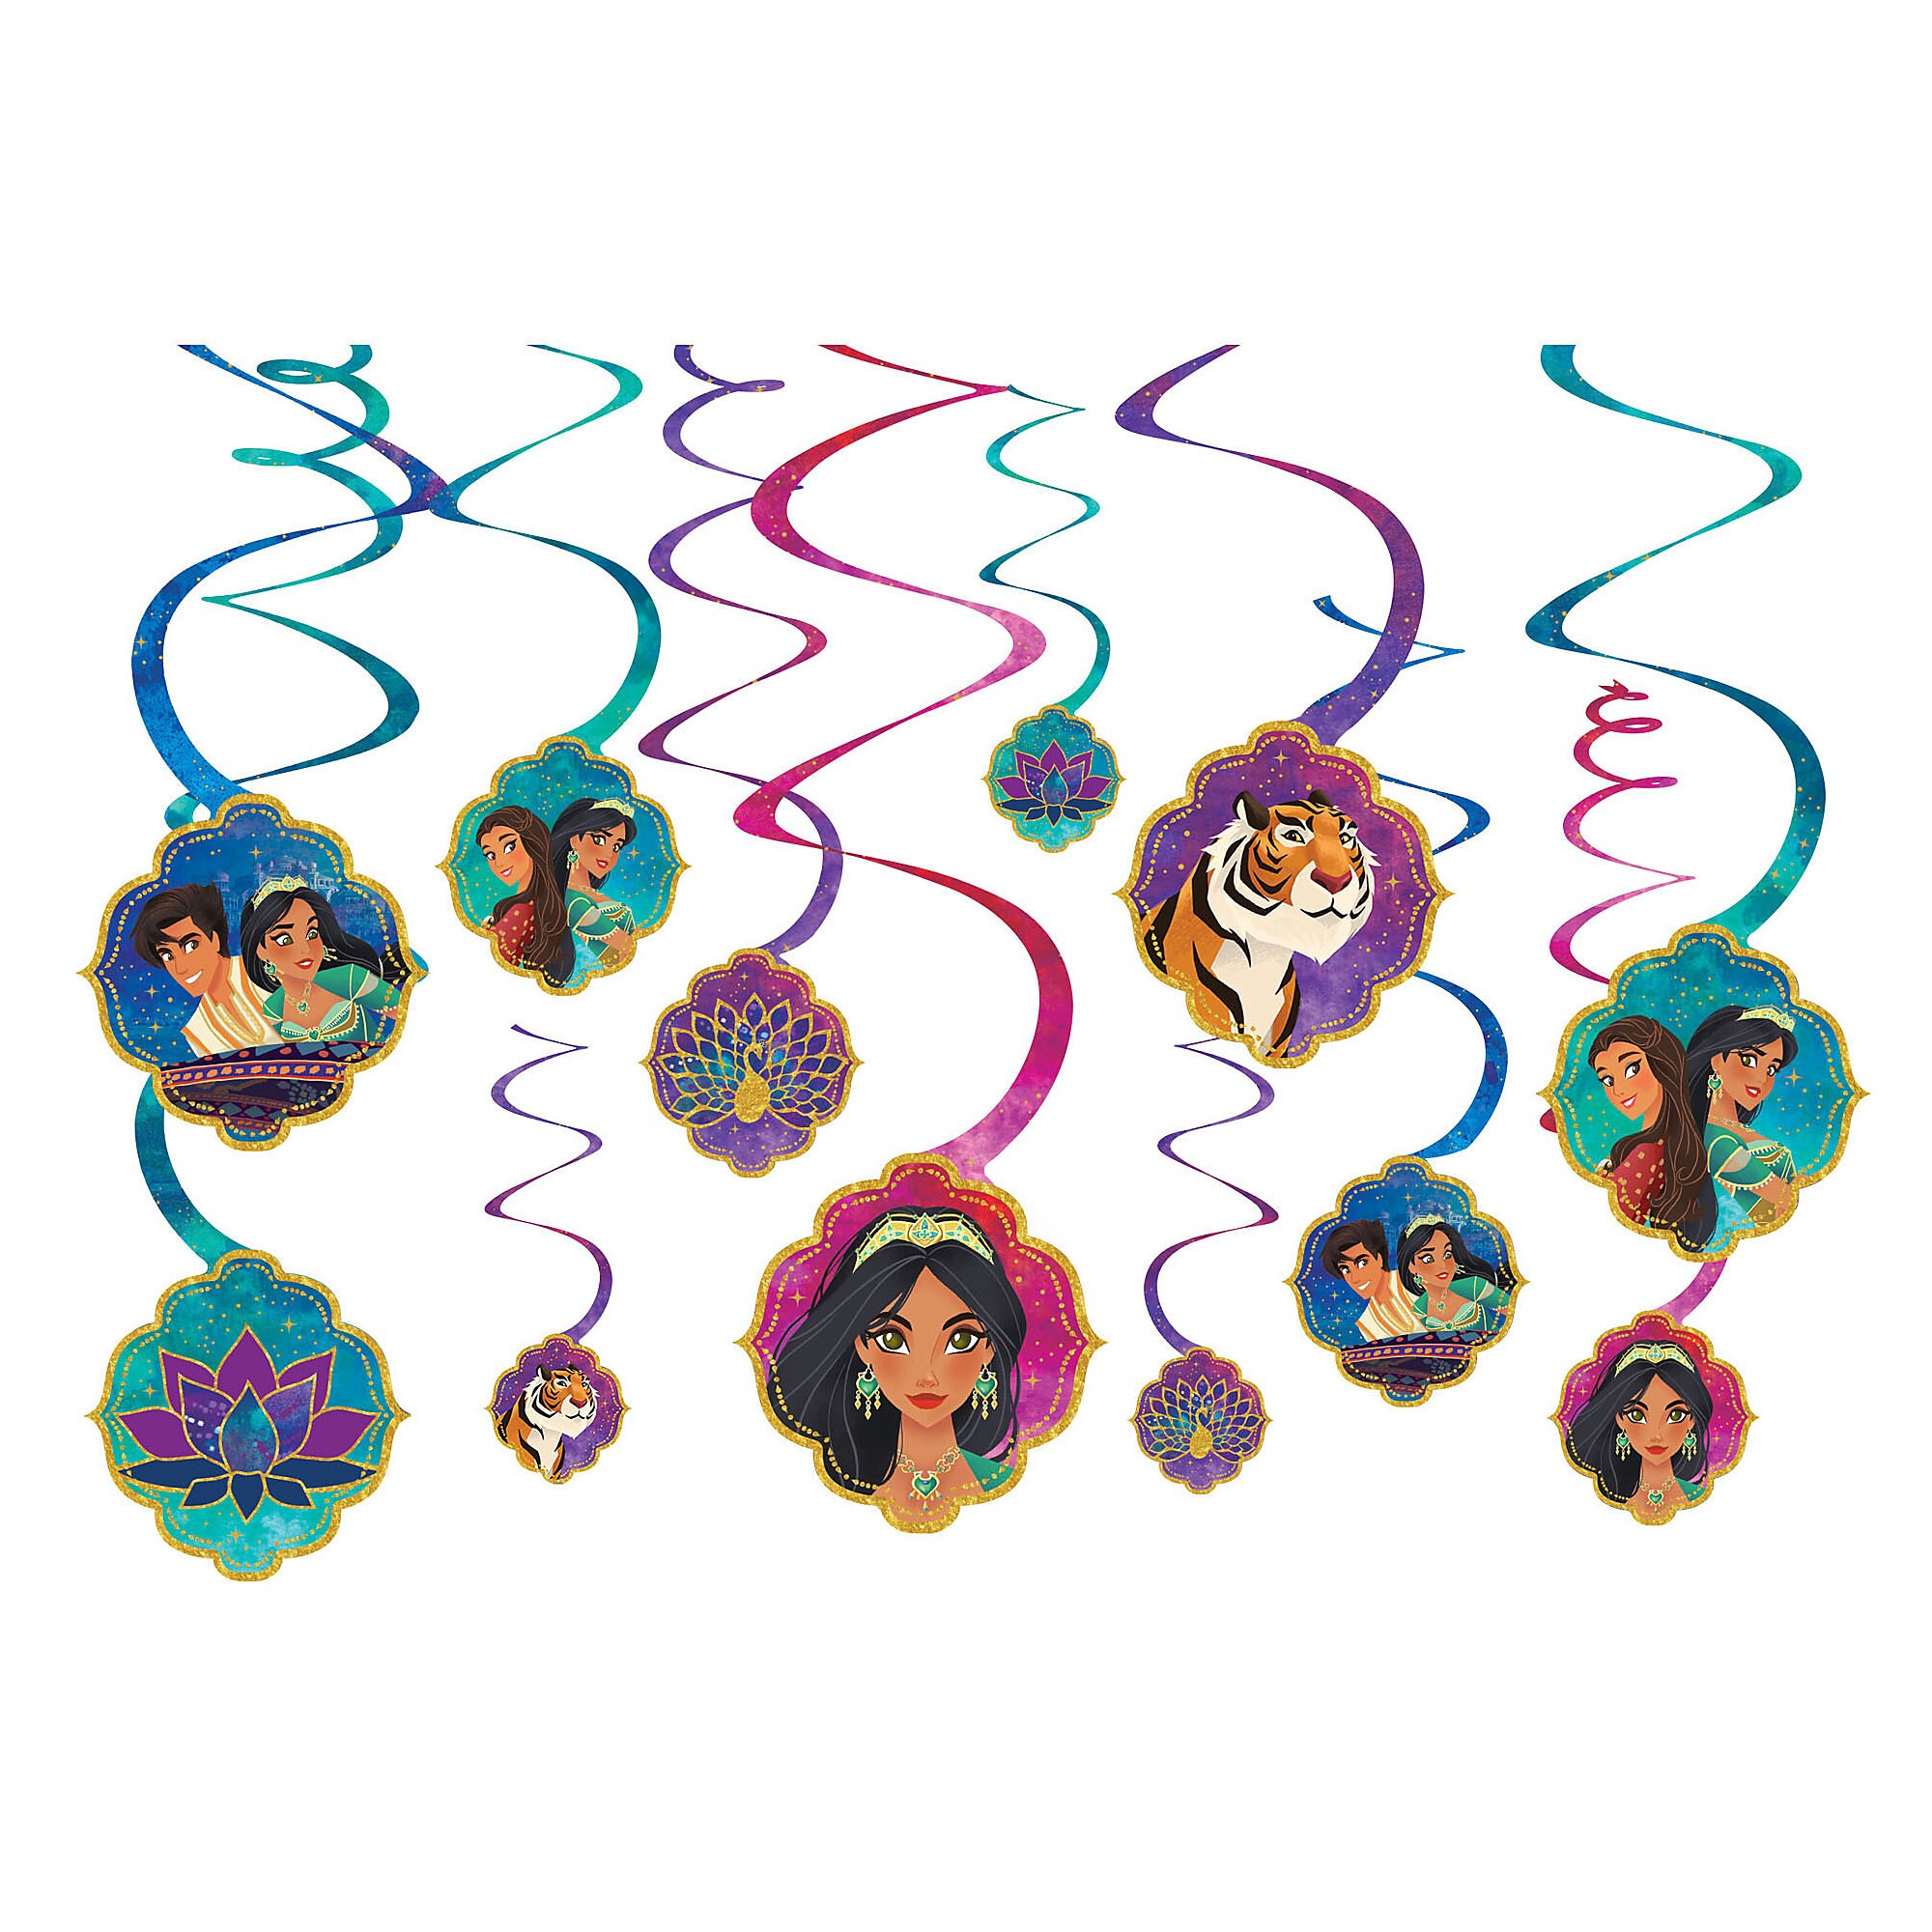 Aladdin Spiral Party Decorations - Live Action Film